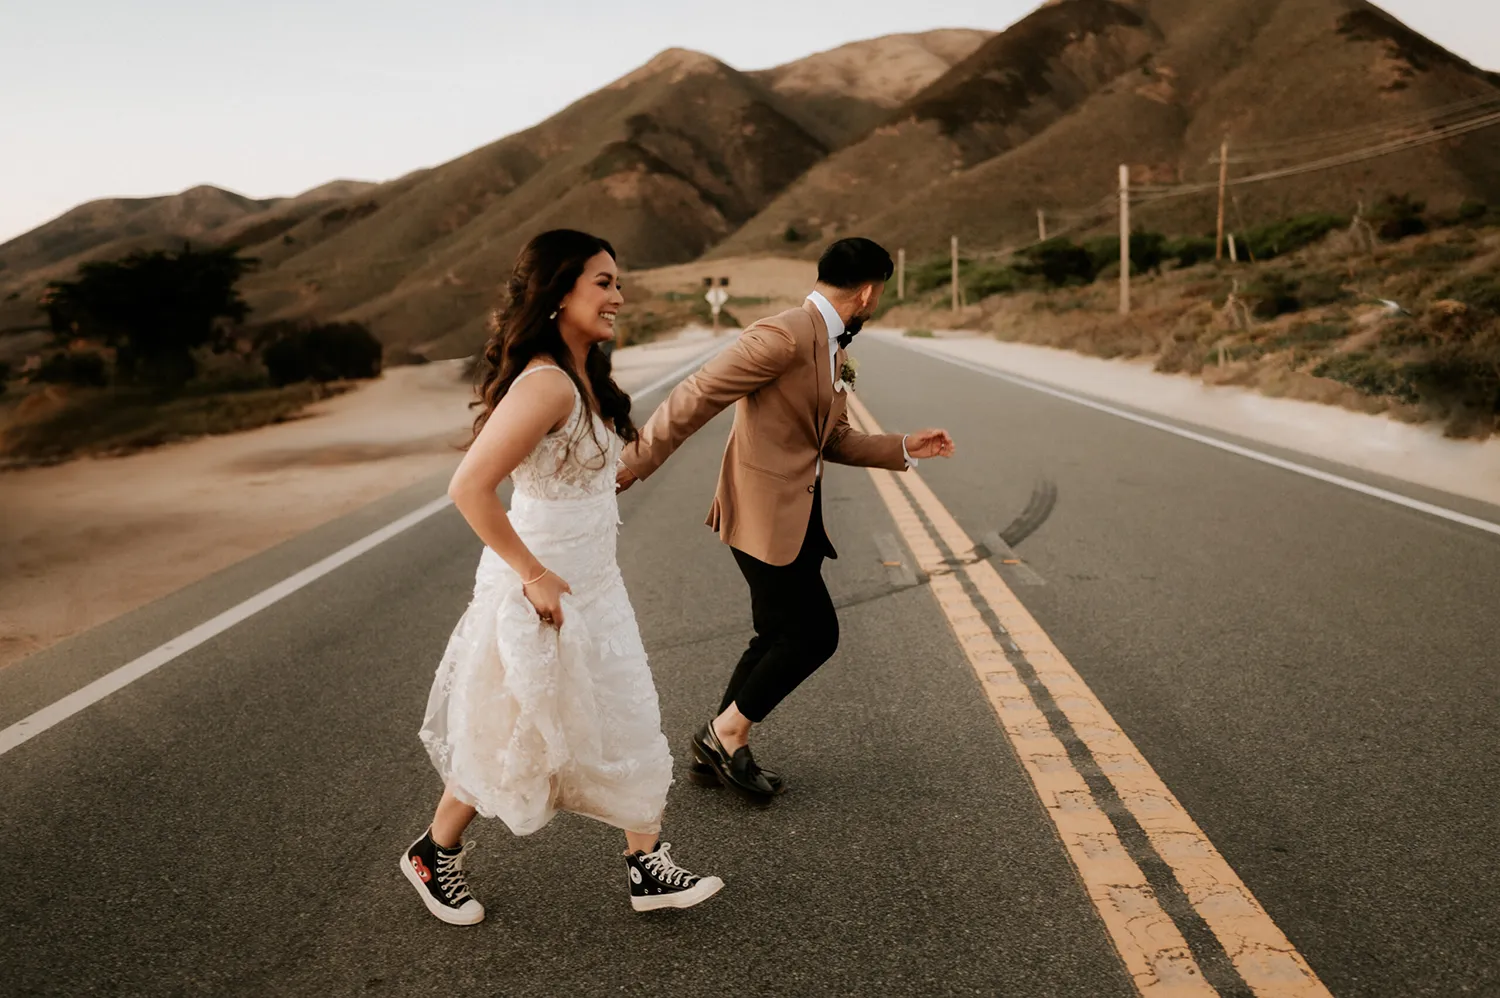 Captured by Heather K Purdy, a name among the Top Wedding Photographers of 2024, a bride and groom in casual footwear dash across a deserted road, with the rolling hills of California as their backdrop, reflecting a spontaneous and adventurous spirit.